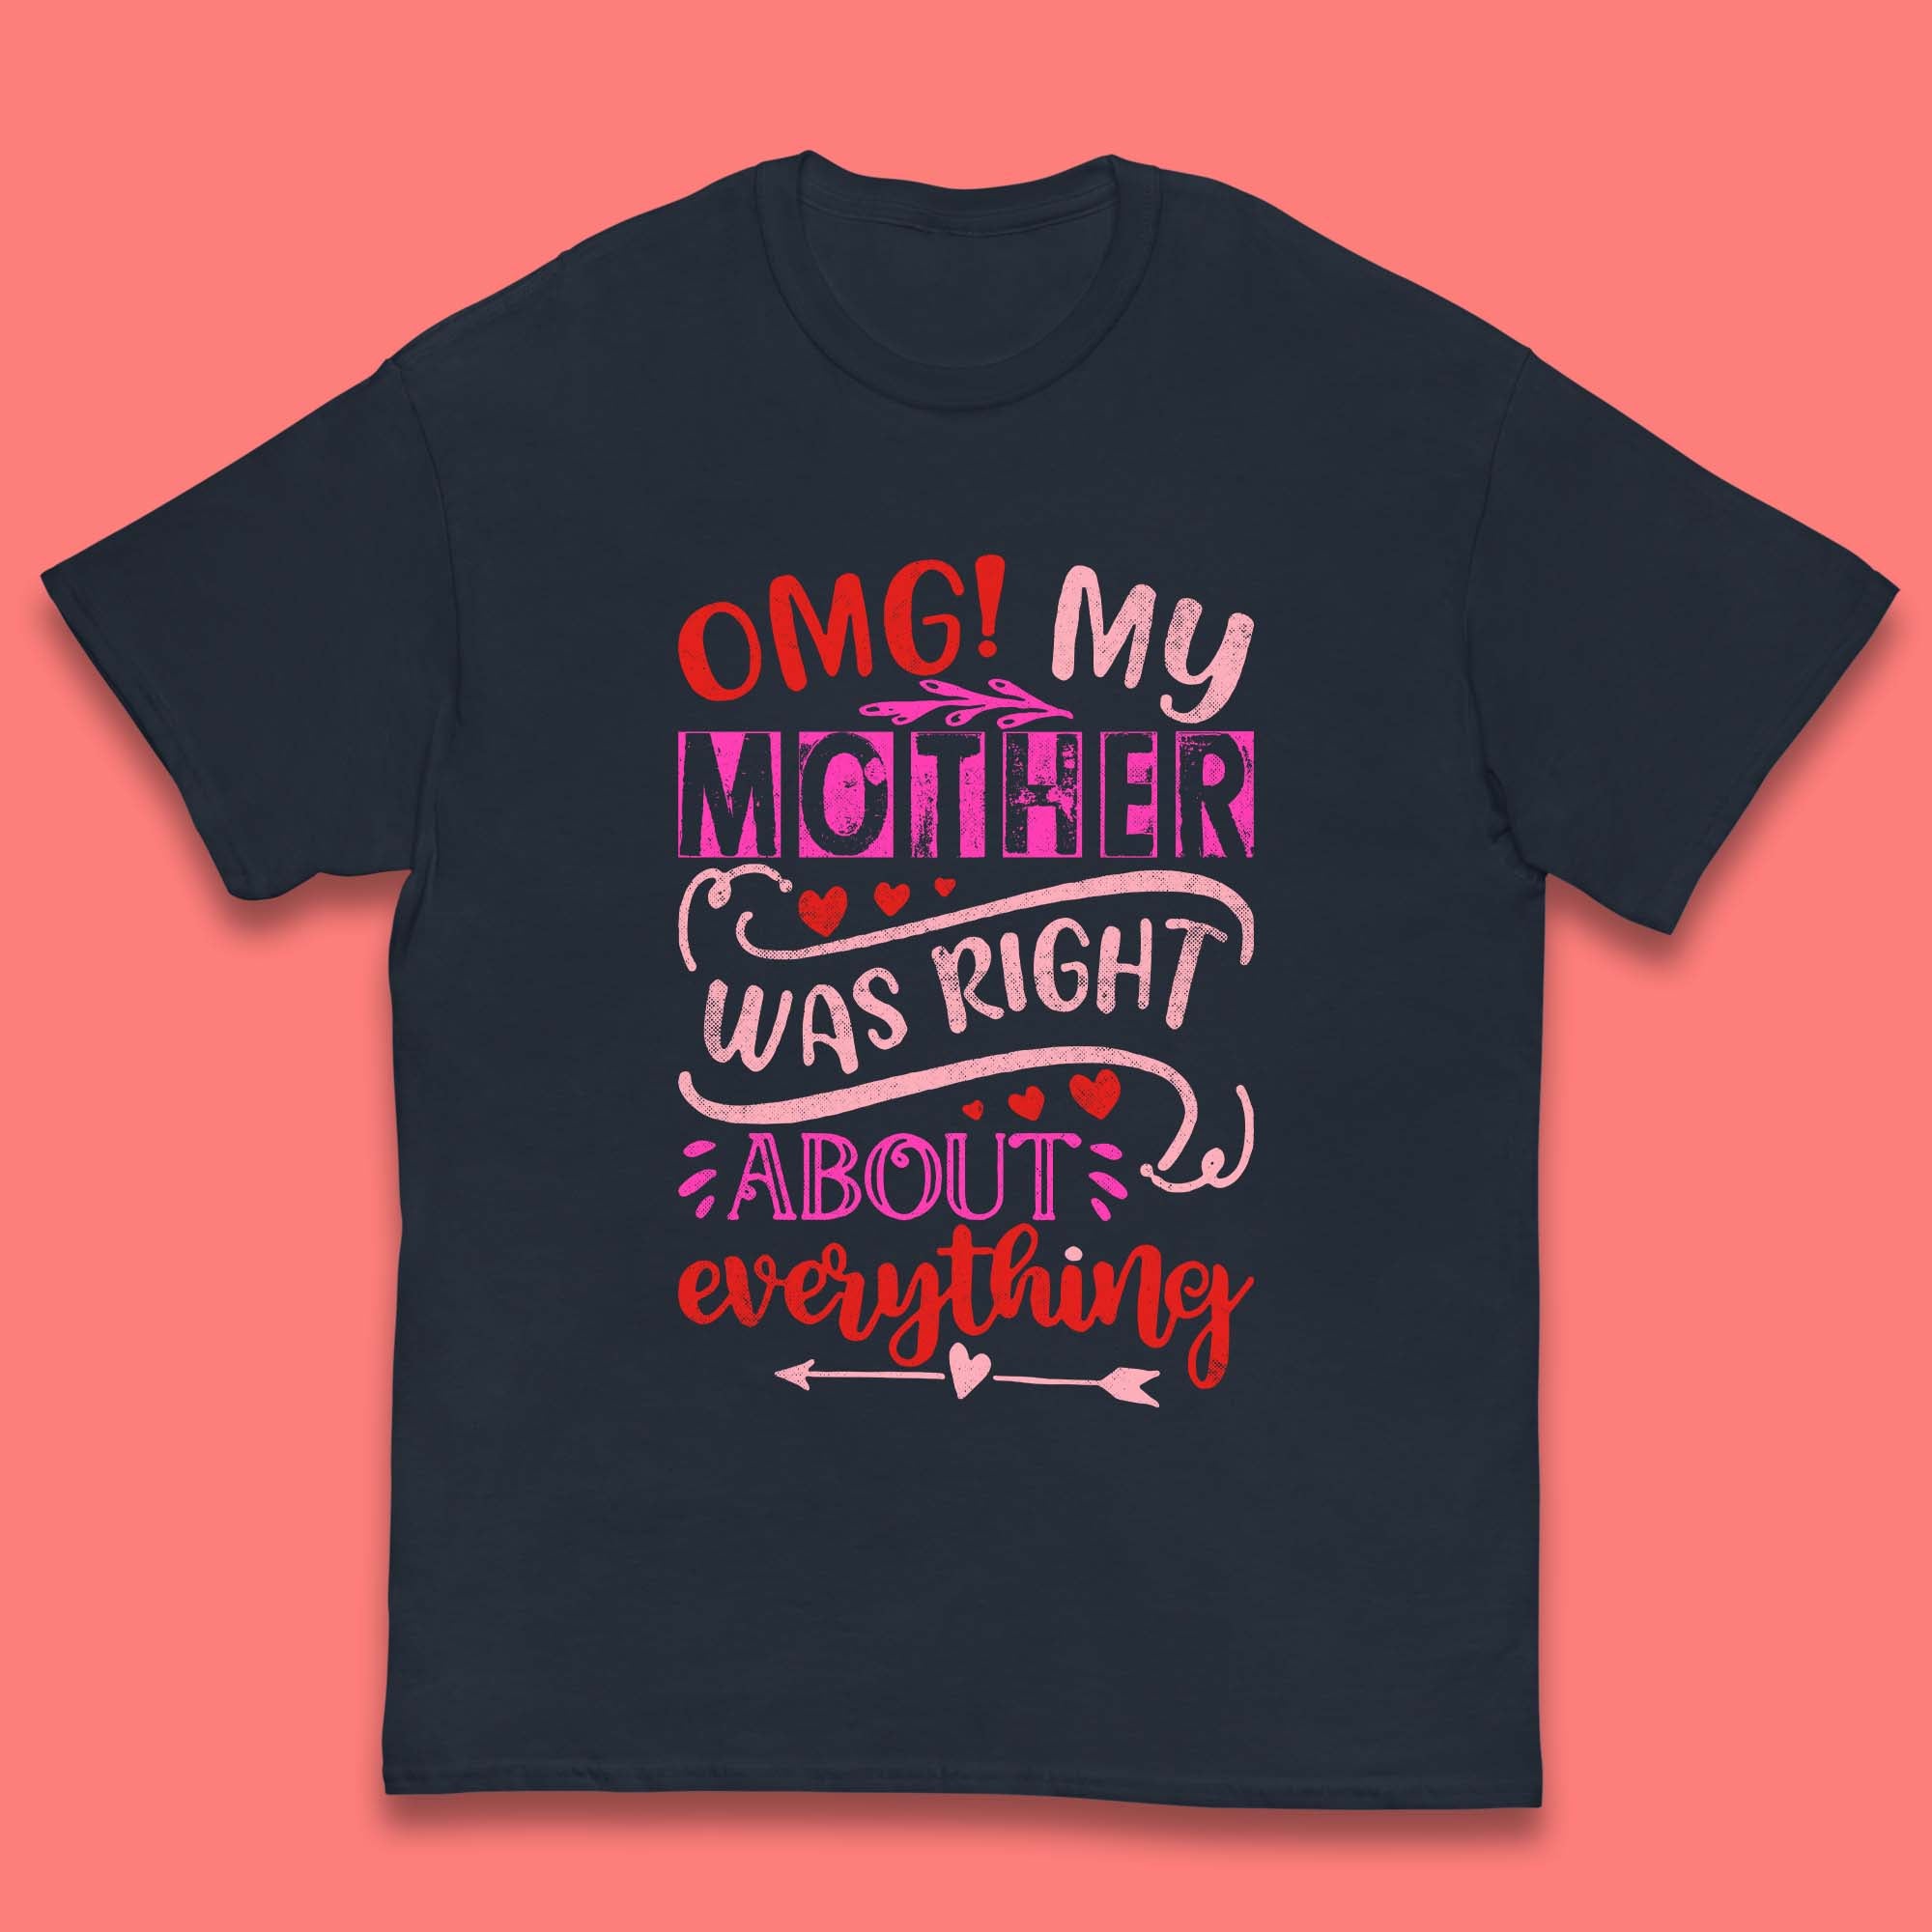 My Mother Was Right Kids T-Shirt